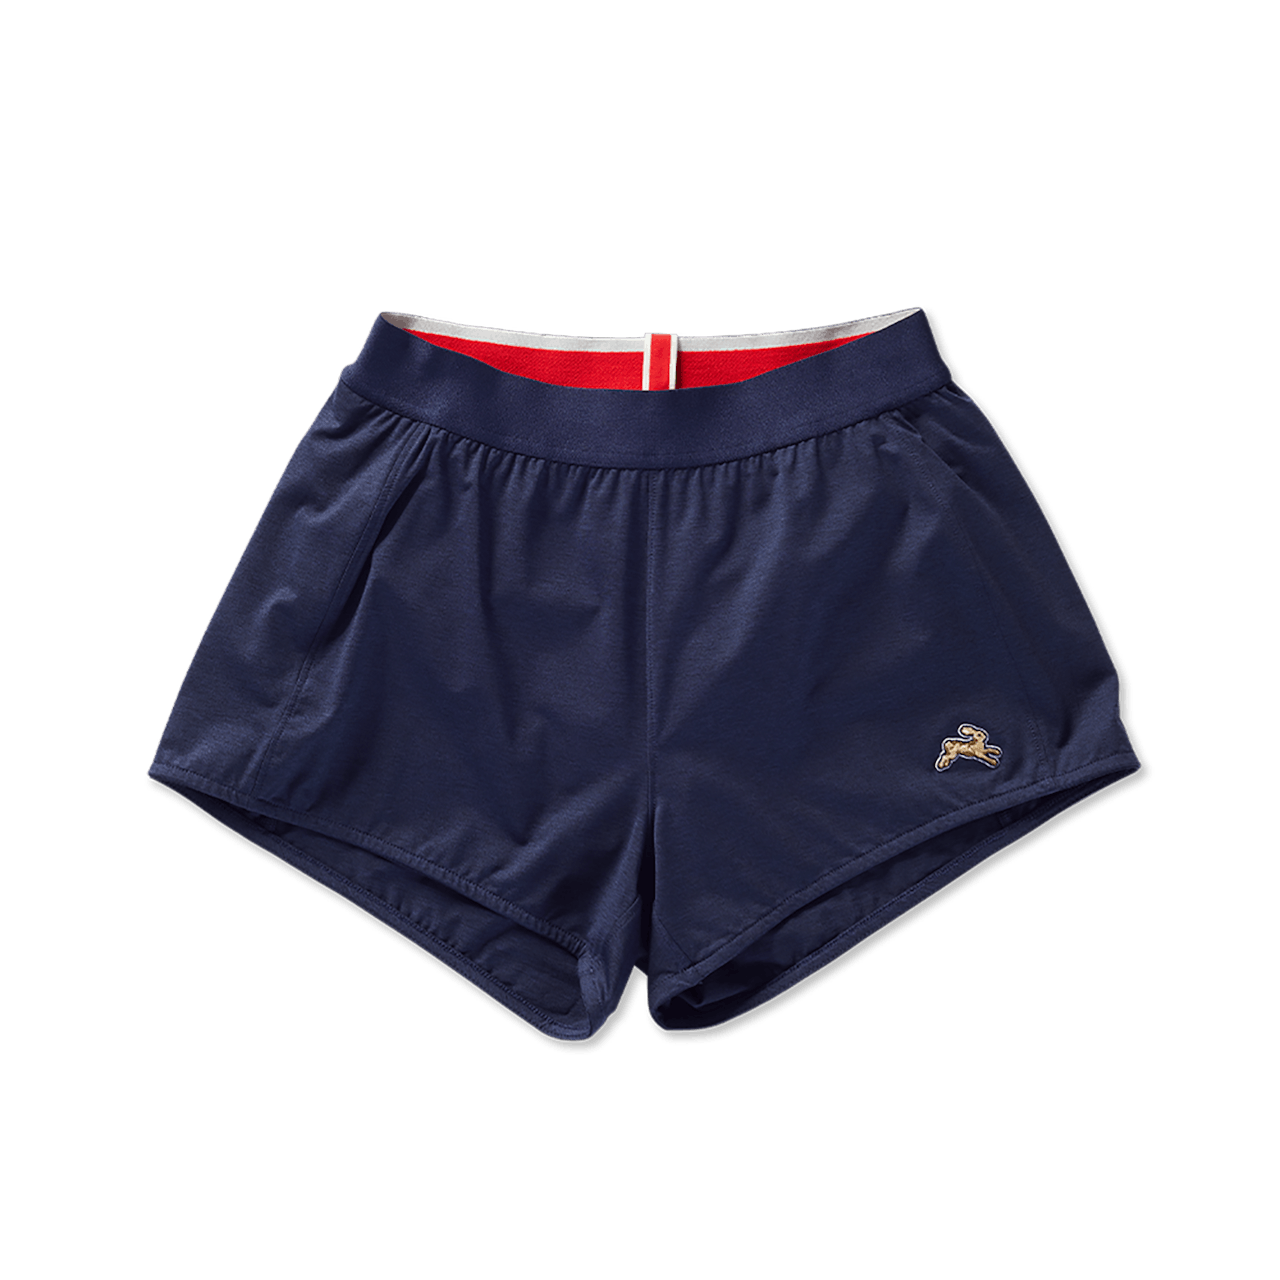 Women's Session Speed Shorts